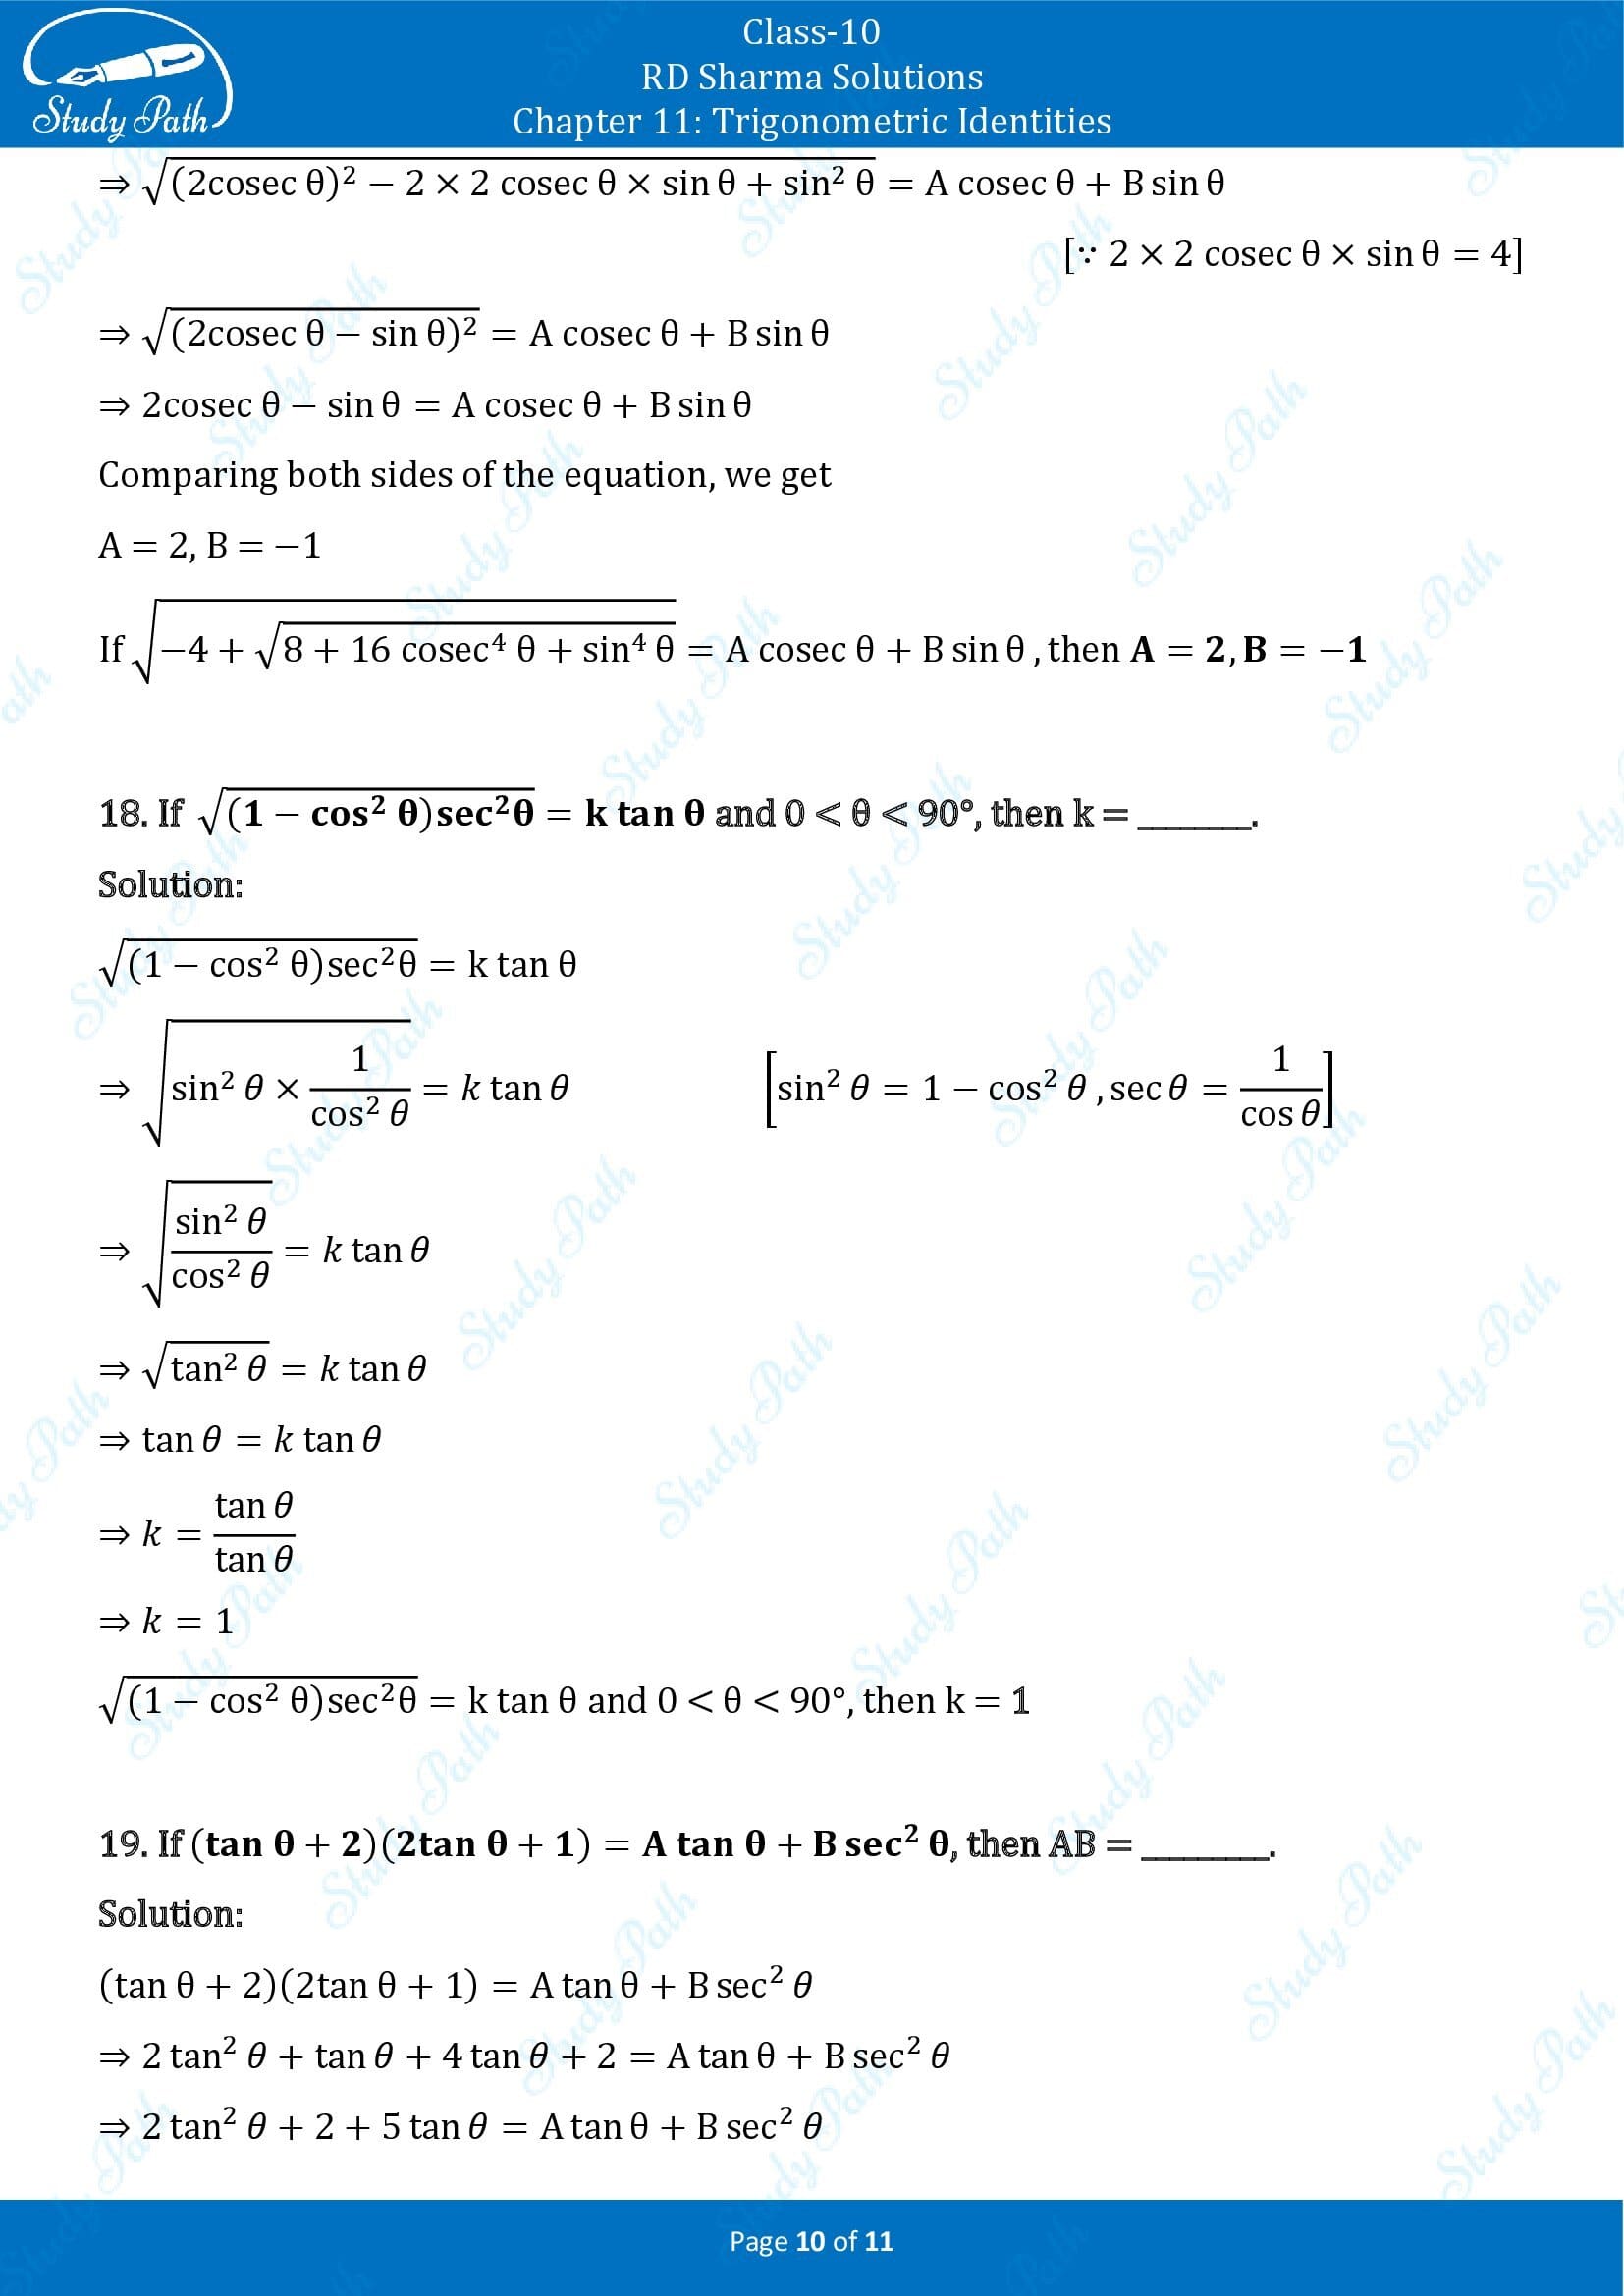 RD Sharma Solutions Class 10 Chapter 11 Trigonometric Identities Fill in the Blank Type Questions FBQs 00010